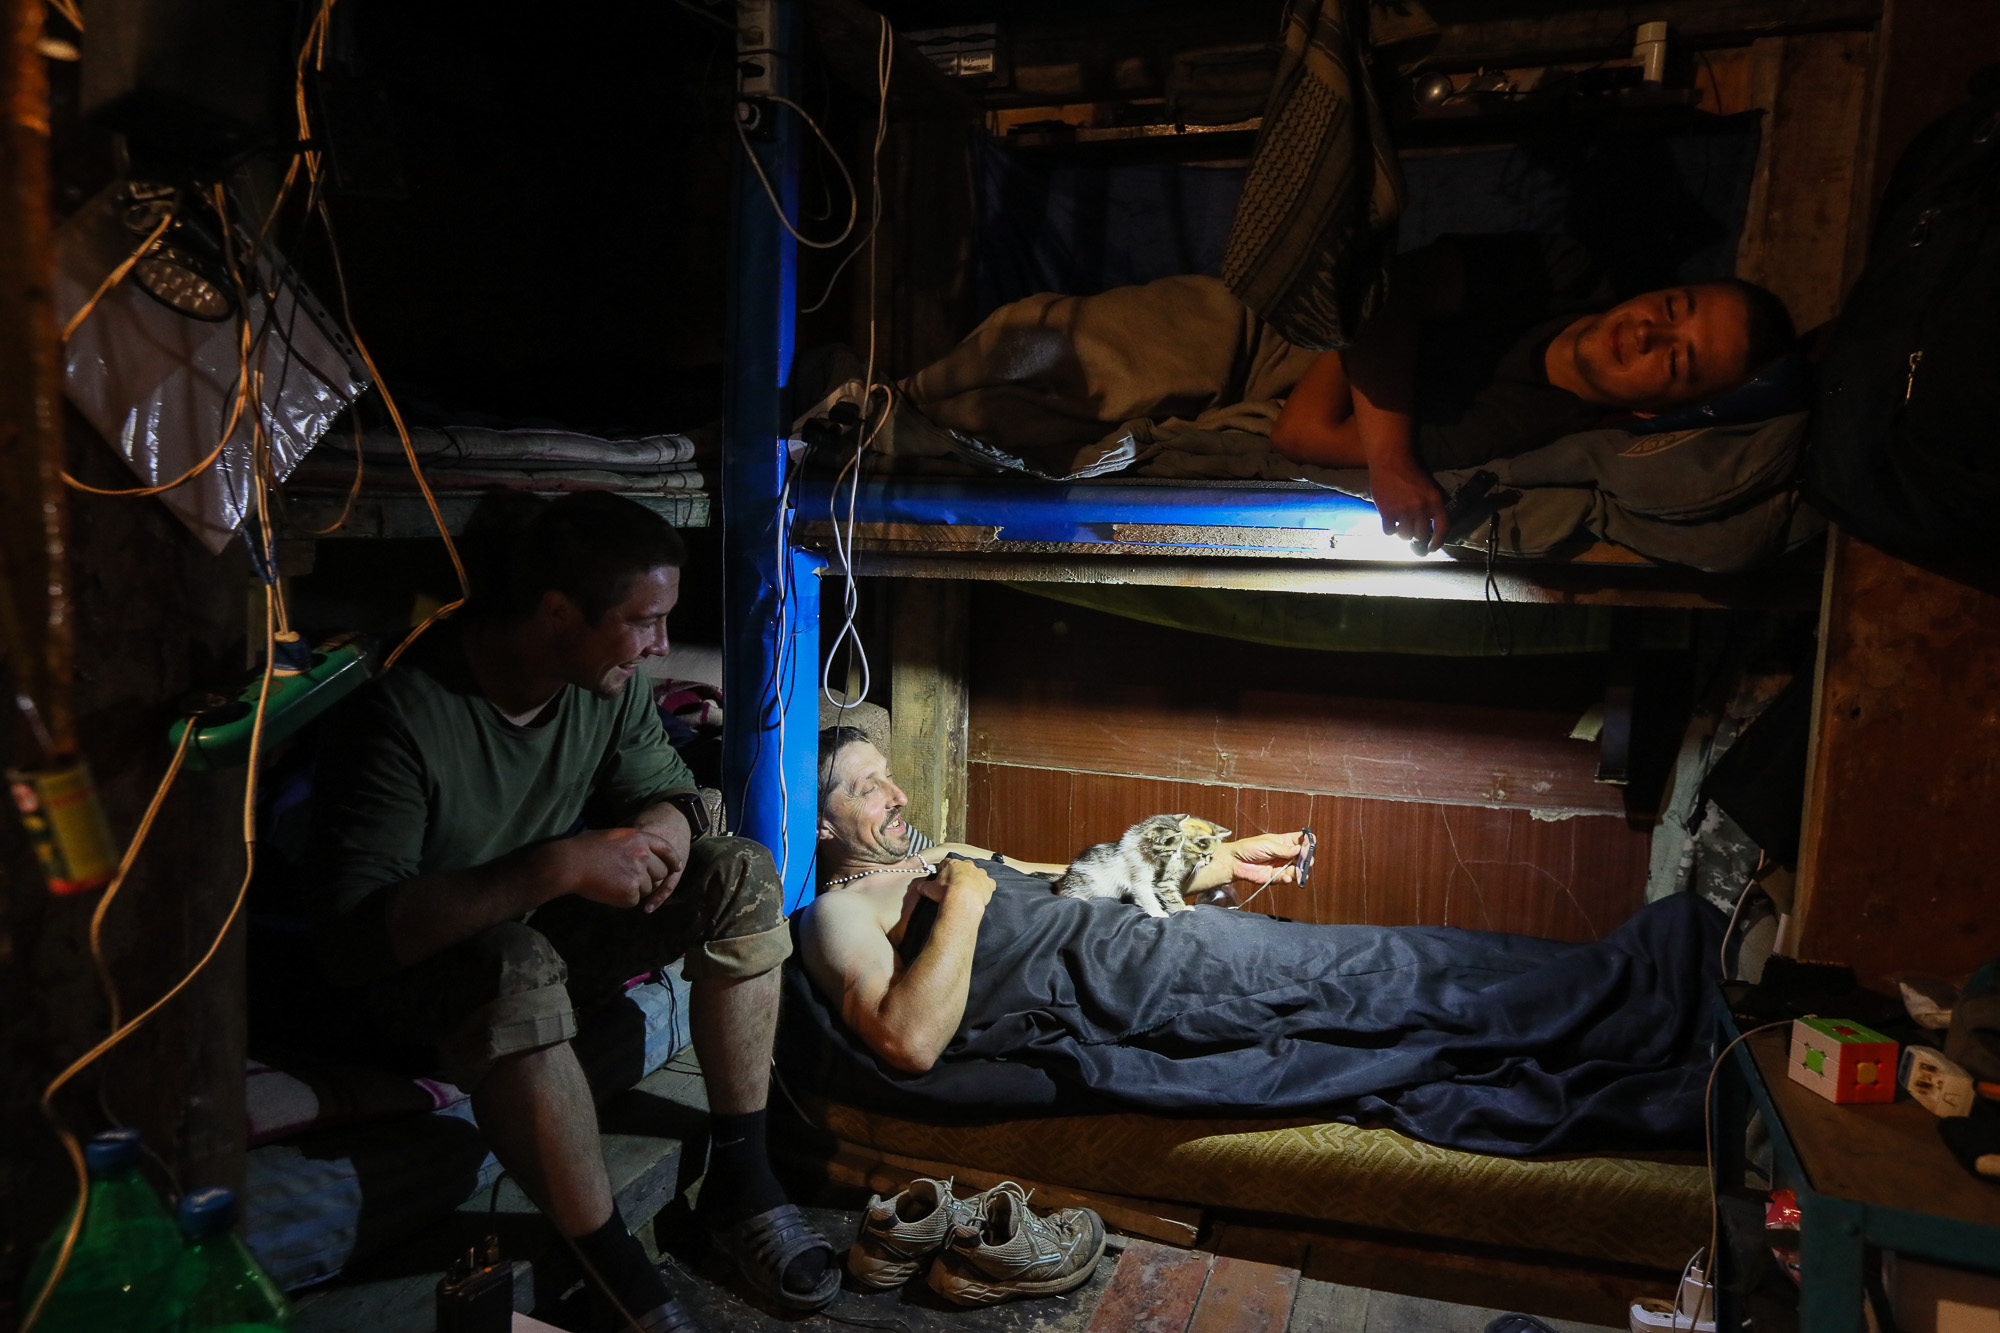 Ukrainian soldiers rest after their combat duty in a barrack in the town of Zaitseve on June 25, 2018.